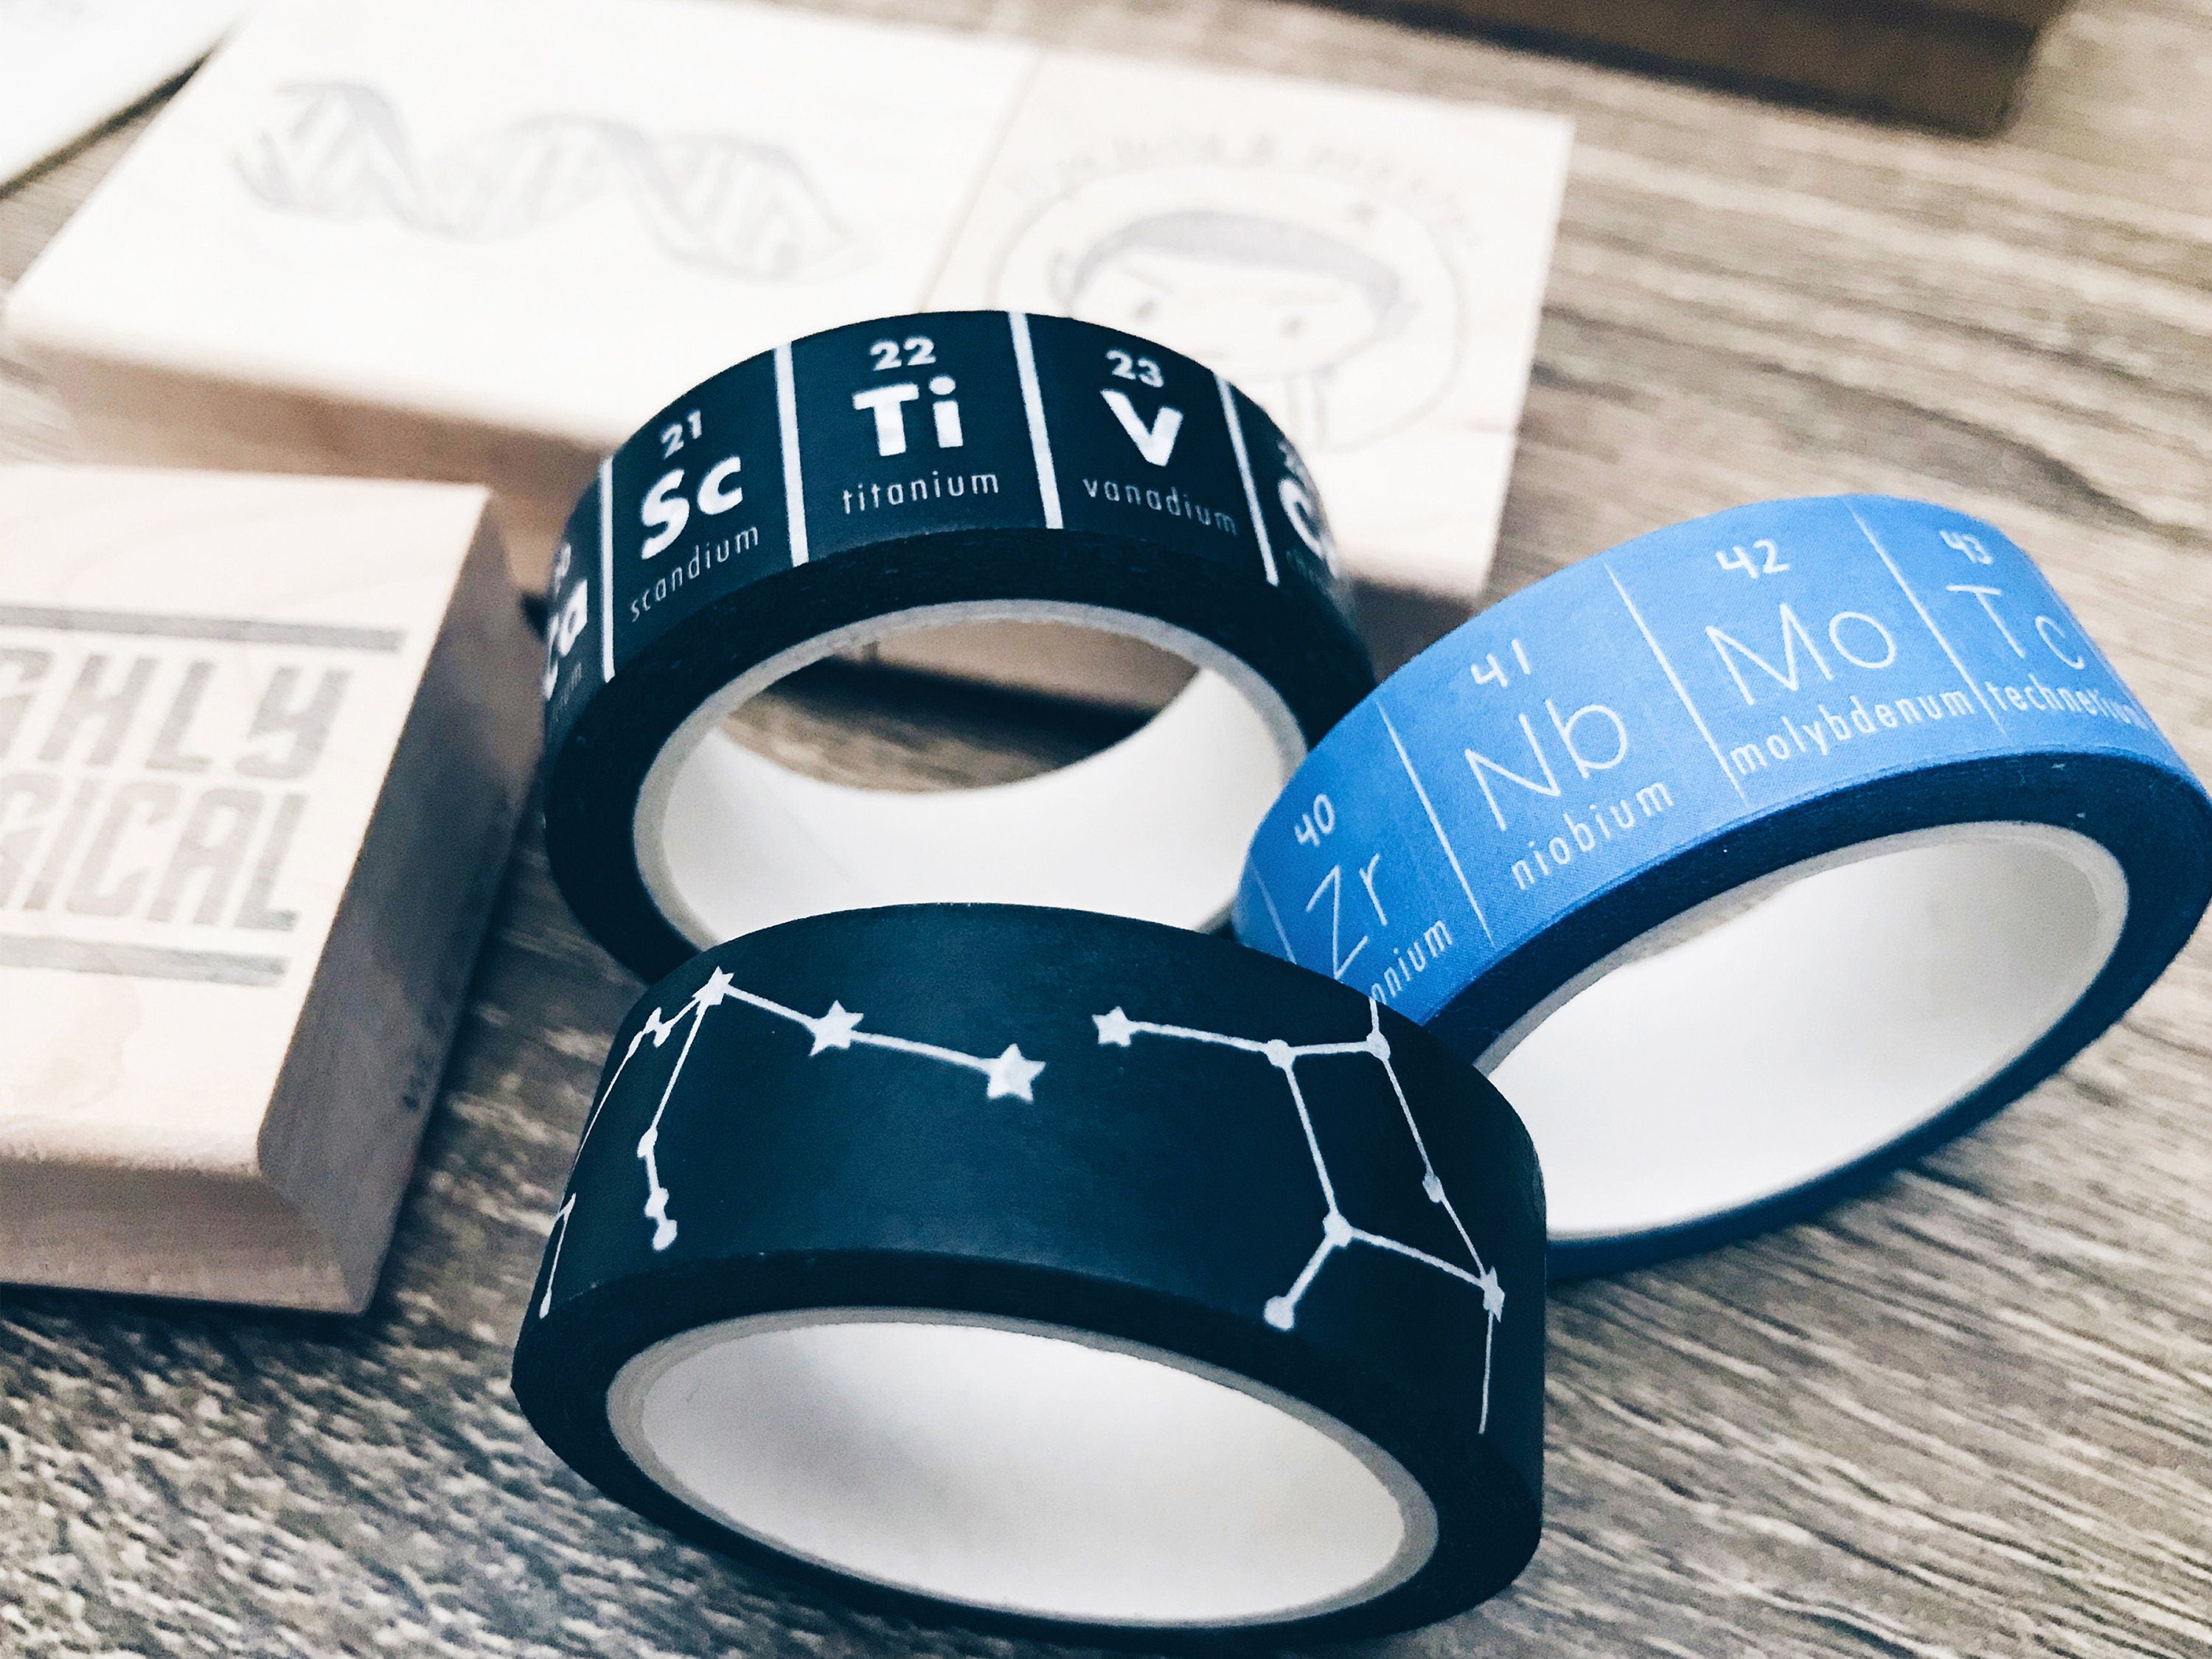 Periodic Table of Elements Washi Tape - Studyspo Stationery Planner Tape - 10m STEM Science Washi Tape - Chemistry Bujo Accessory